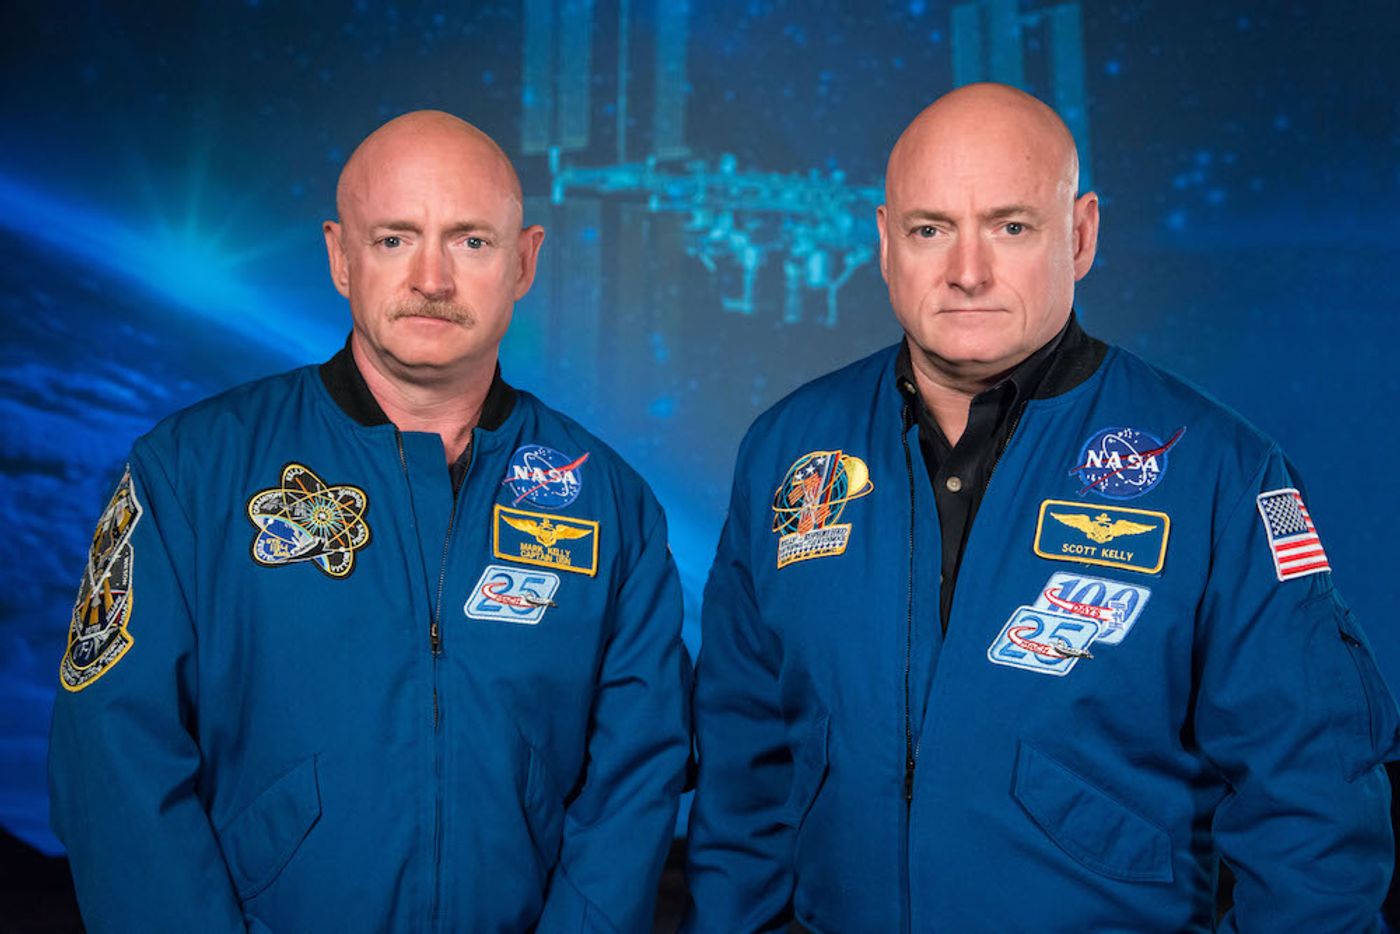 Scott Kelly (prior to his mission) along with his brother, former Astronaut Mark Kelly at the Johnson Space Center, Houston Texas on Jan.19, 2015. / Credit: NASA/Robert Markowitz